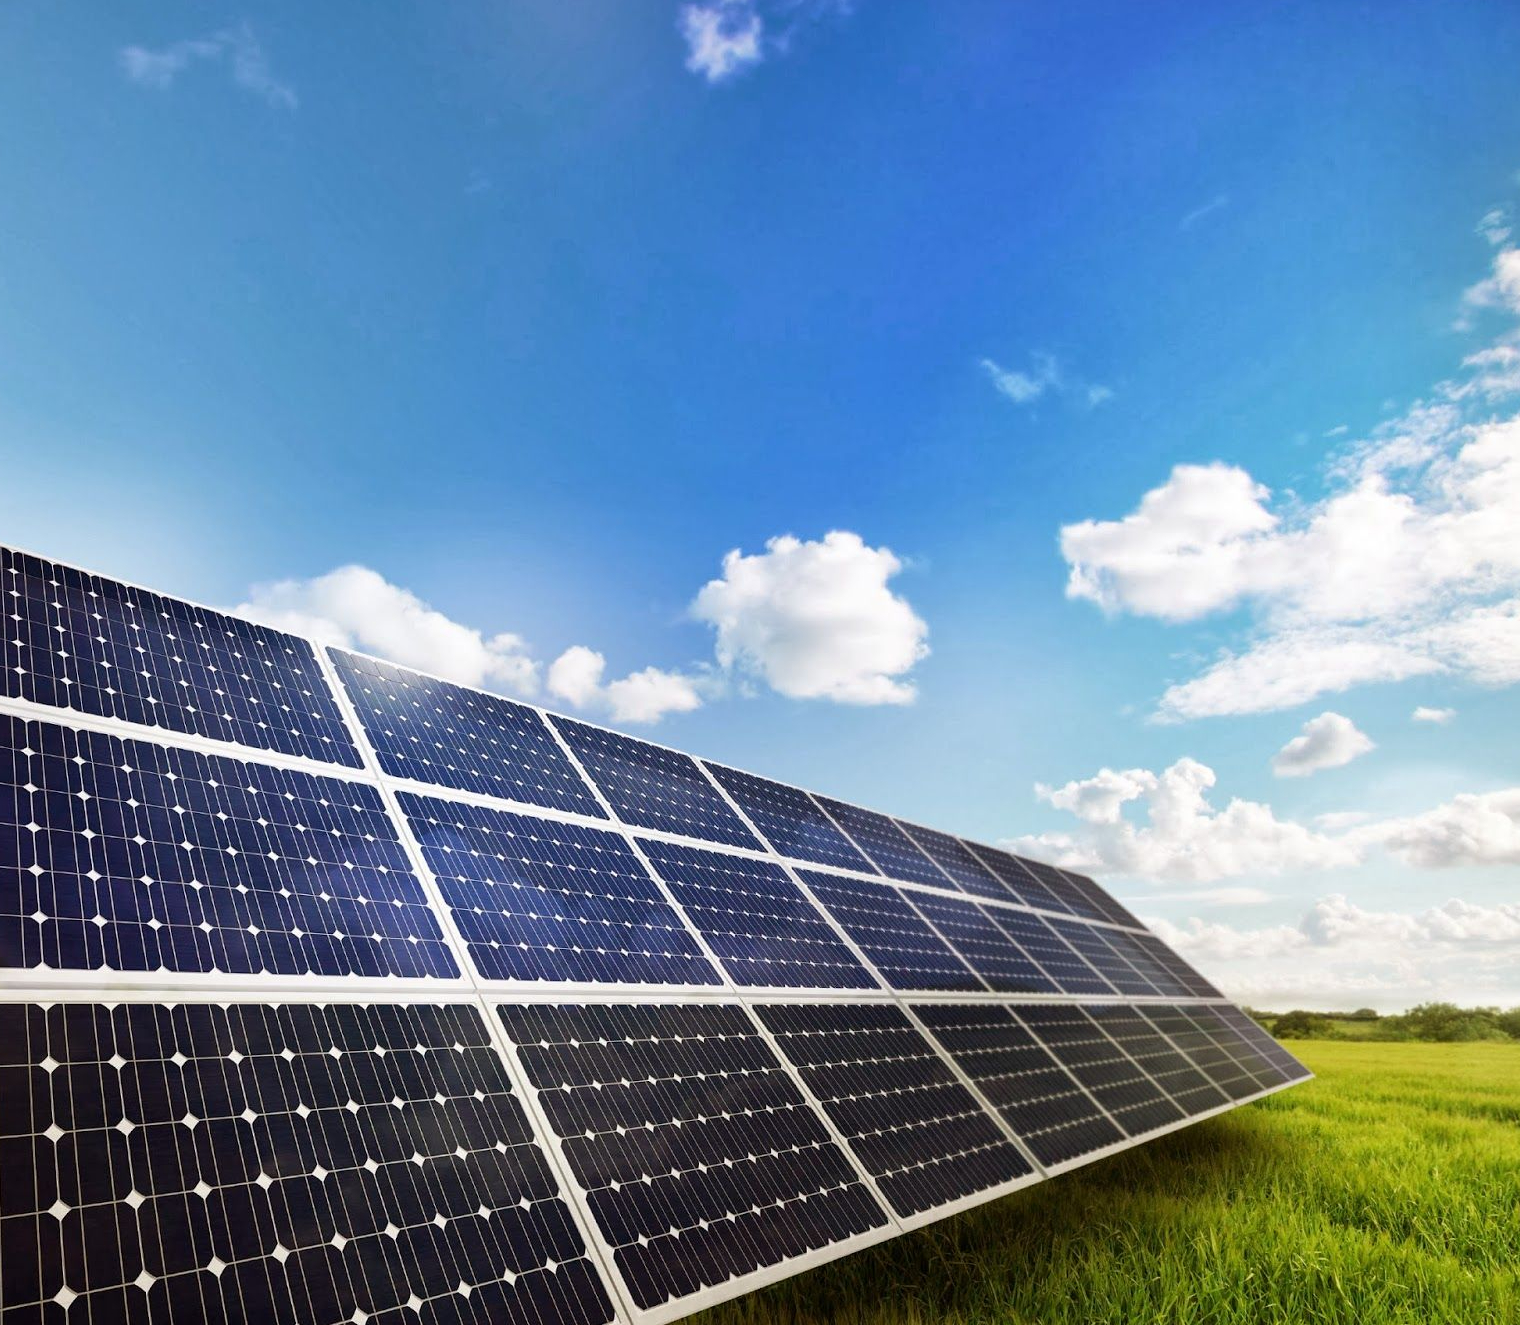 On average, every square meter of Earth's surface receives over 165 watts of solar energy.